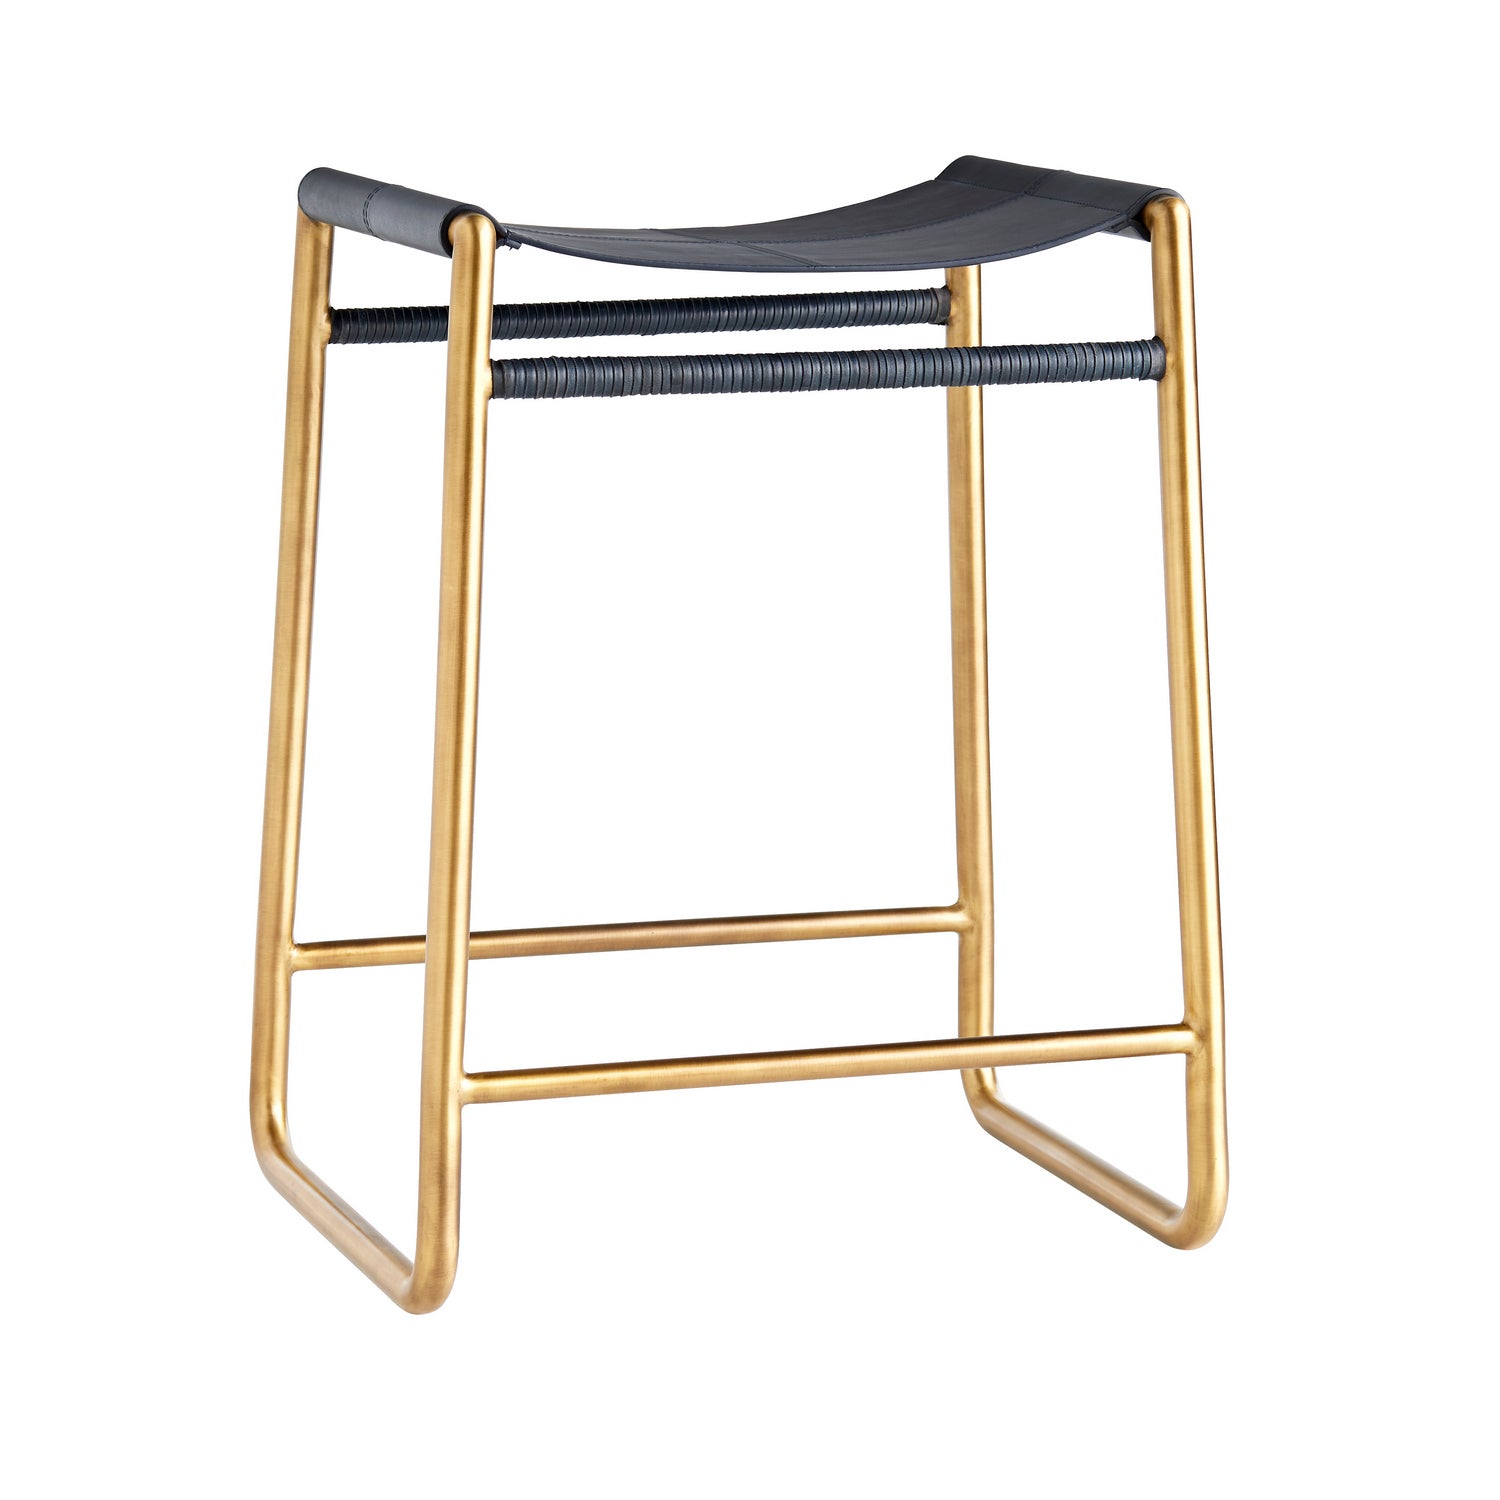 Counter Stool from the Gasper collection in Indigo finish